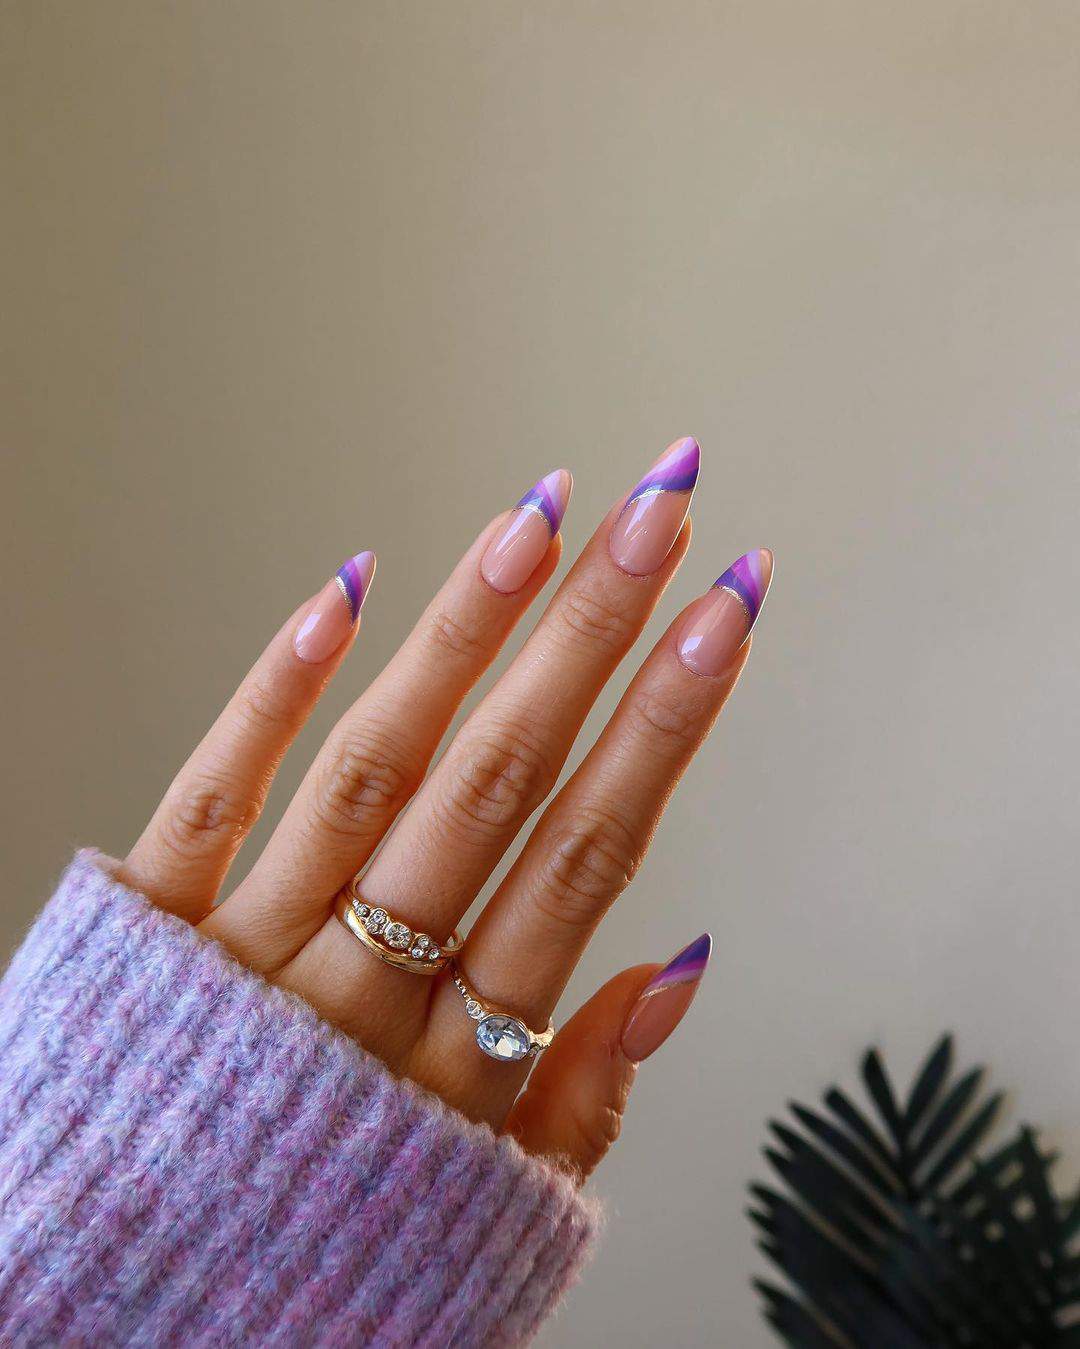 The 100+ Best Nail Designs Trends And Ideas In 2021 images 52